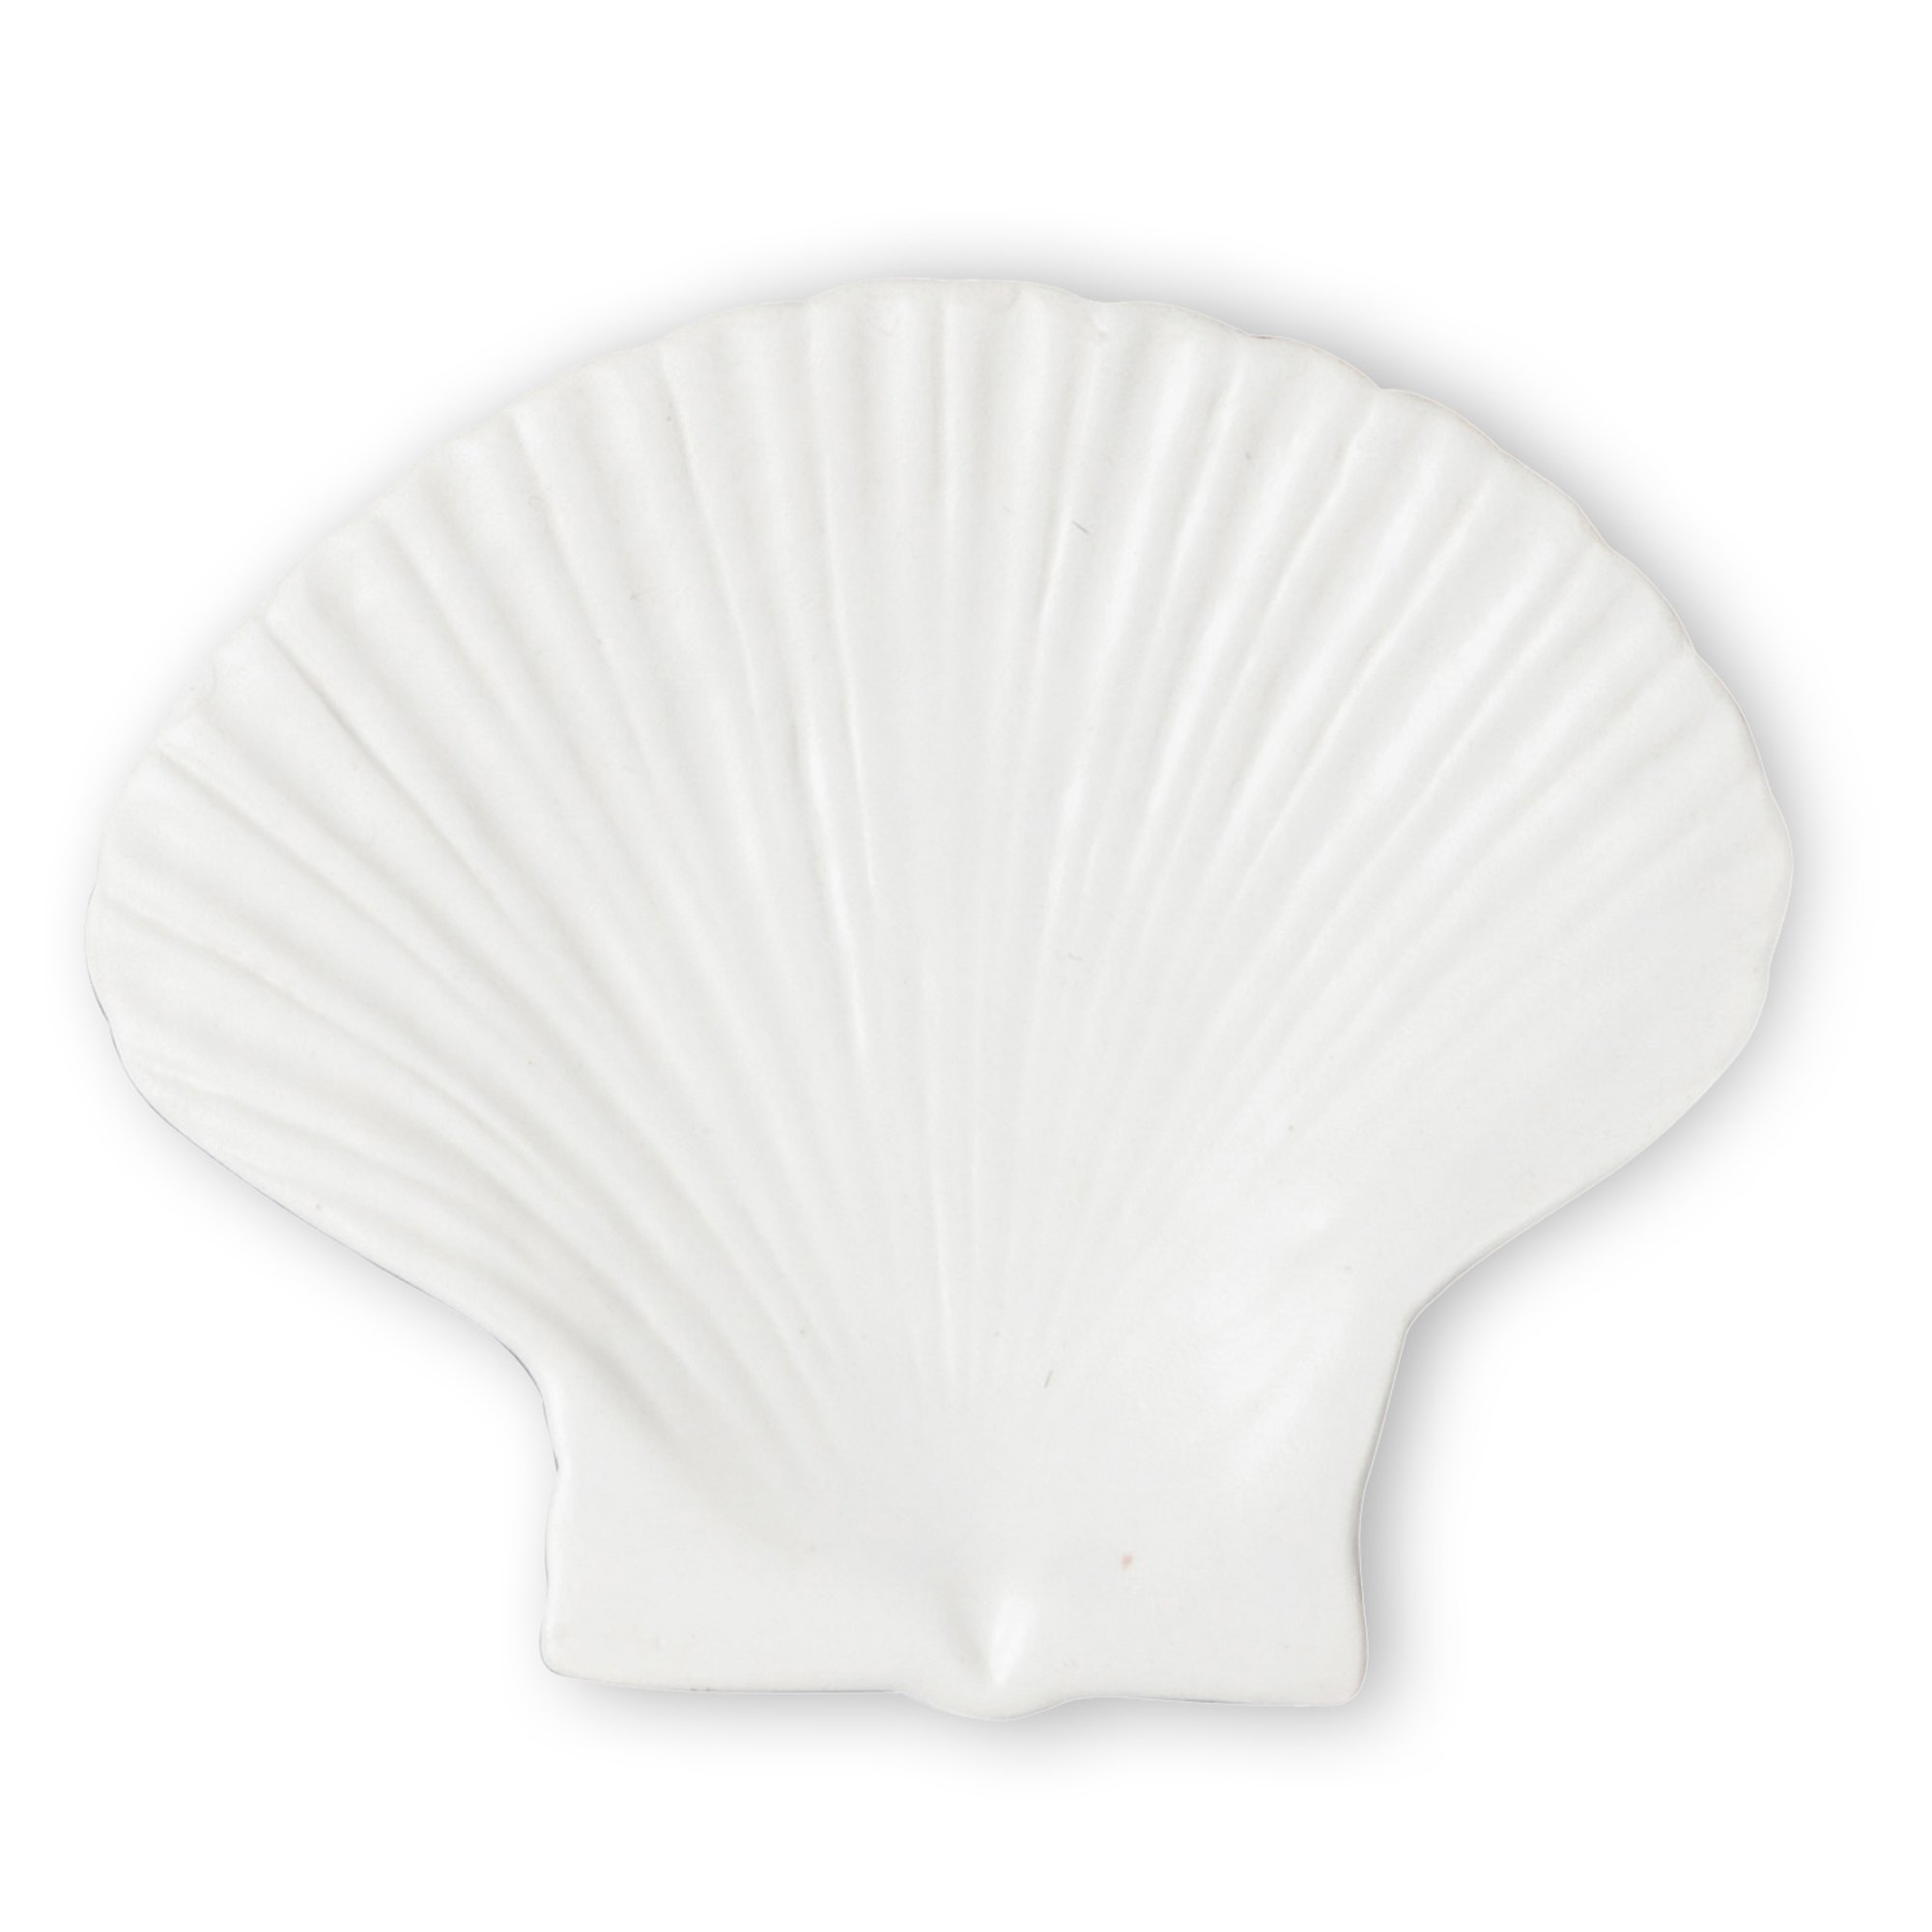 Byon Shell assiet small